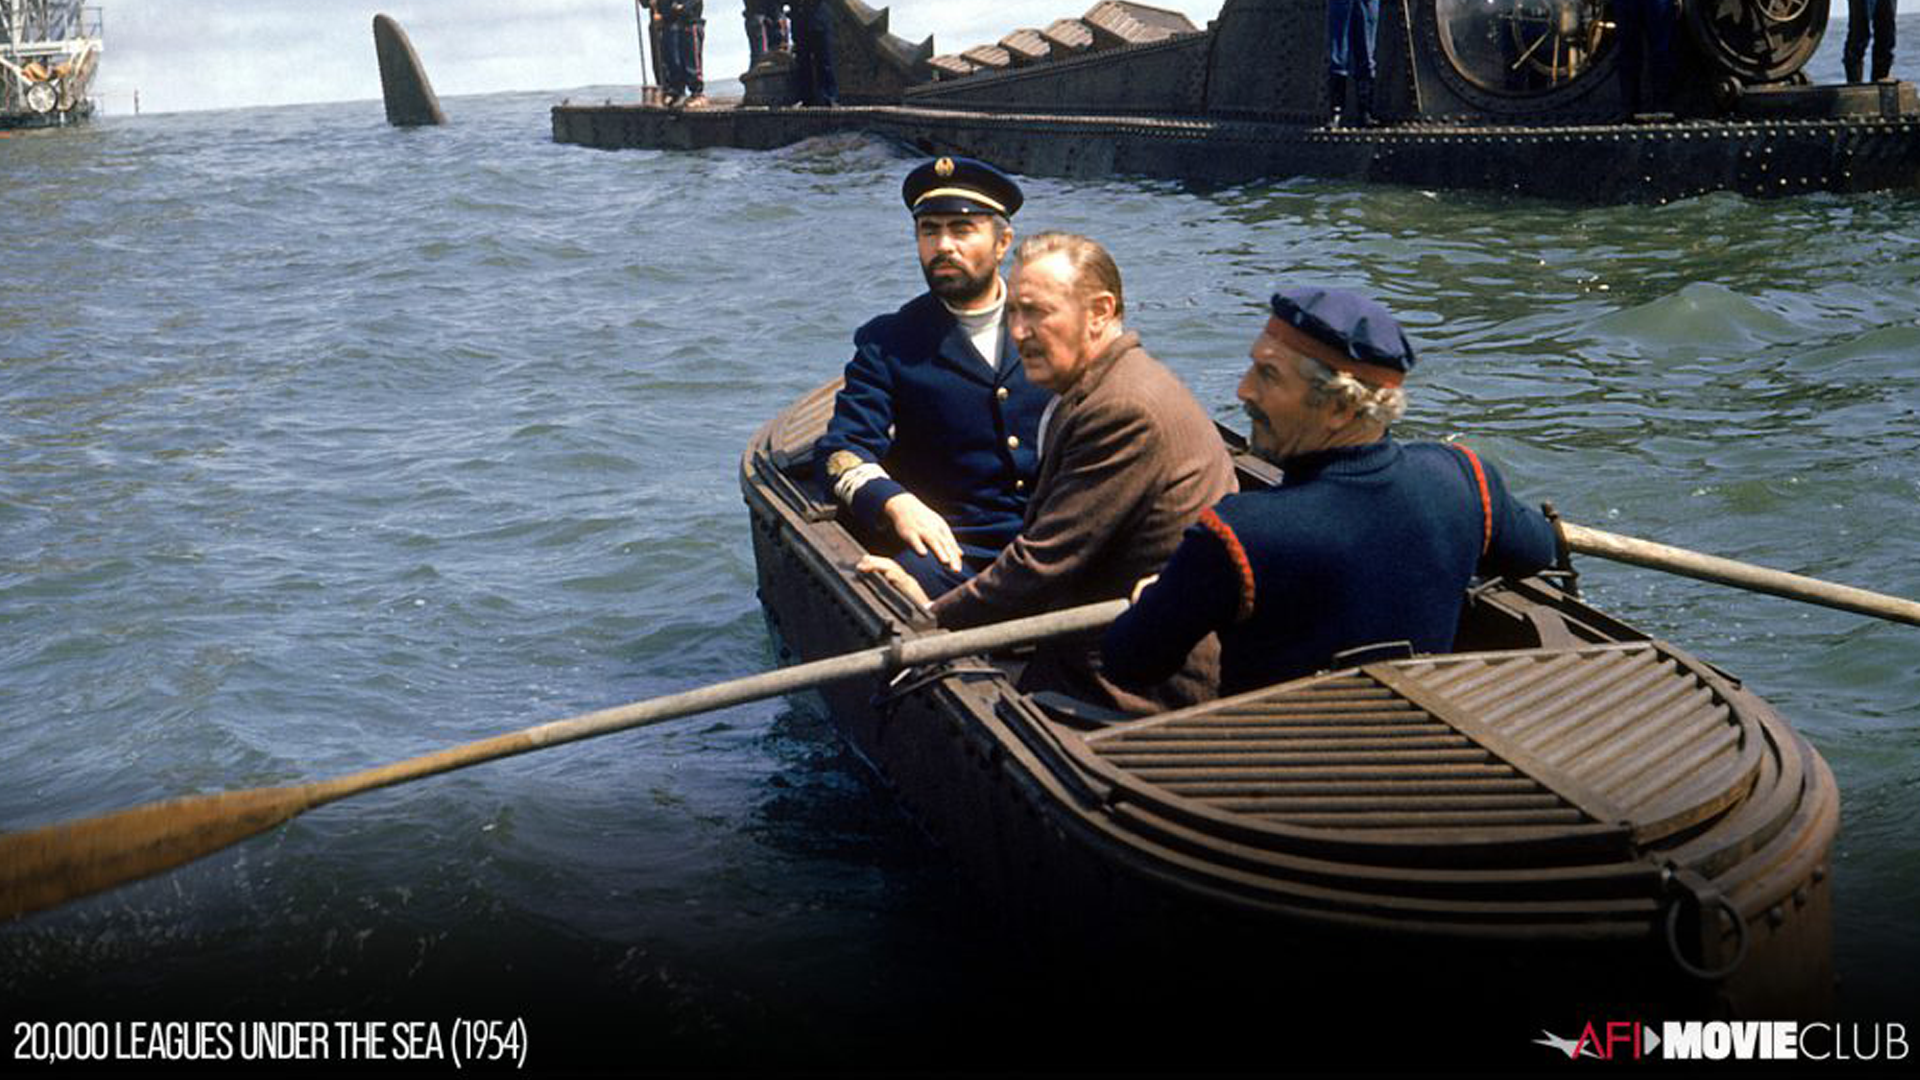 20,000 Leagues Under the Sea Film Still - James Mason and Paul Lukas